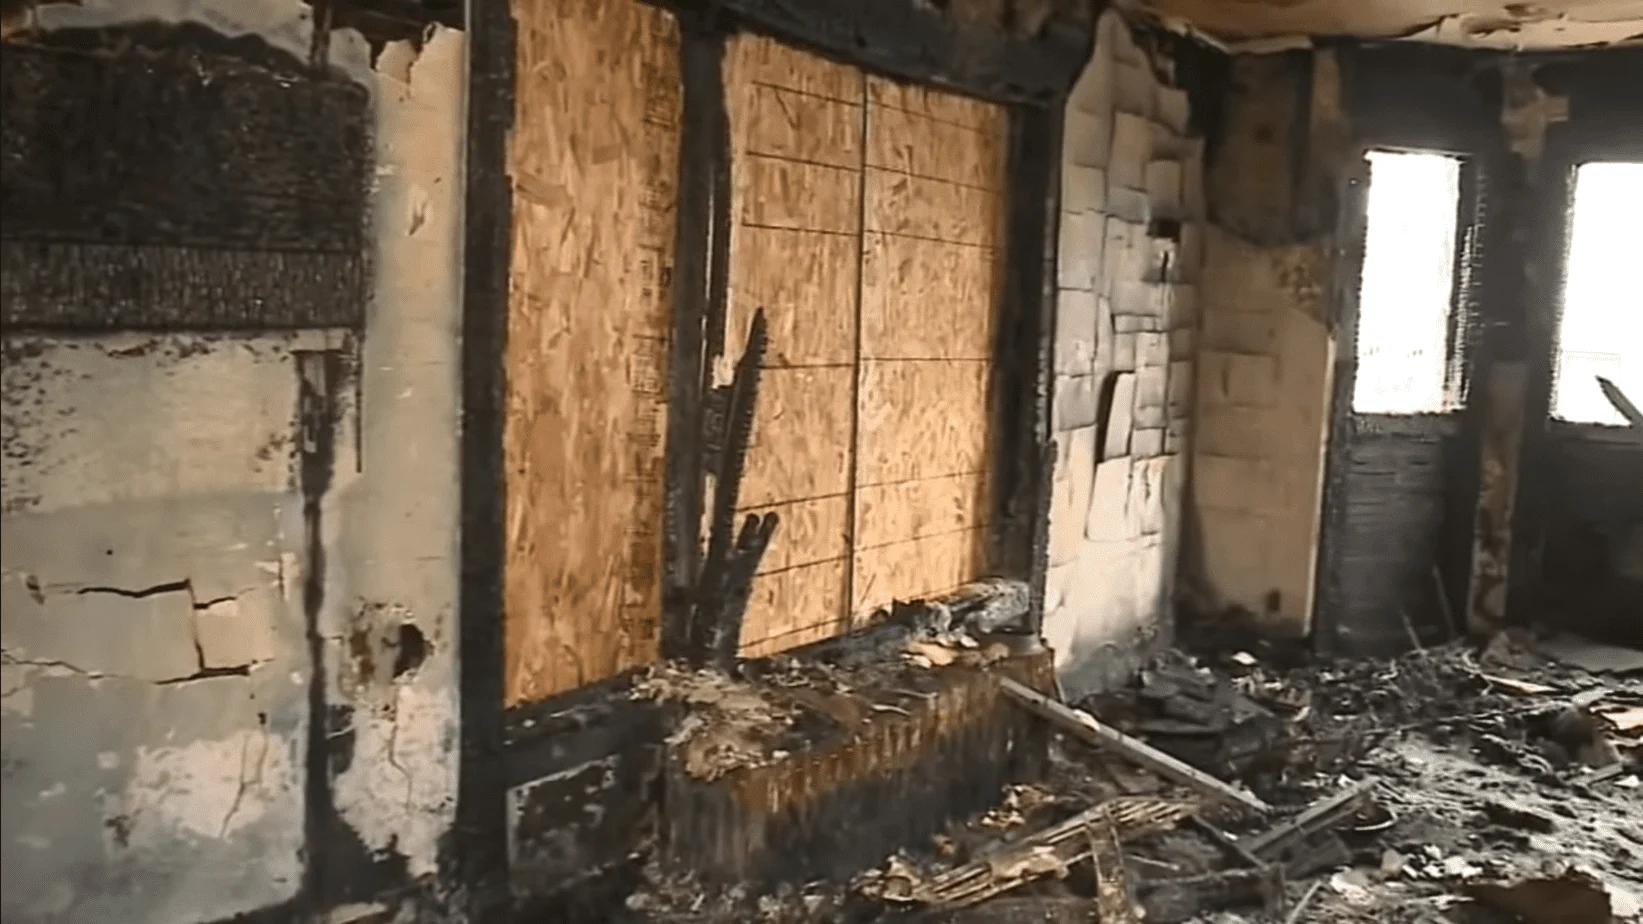 The interior walls were stripped because of the fire.